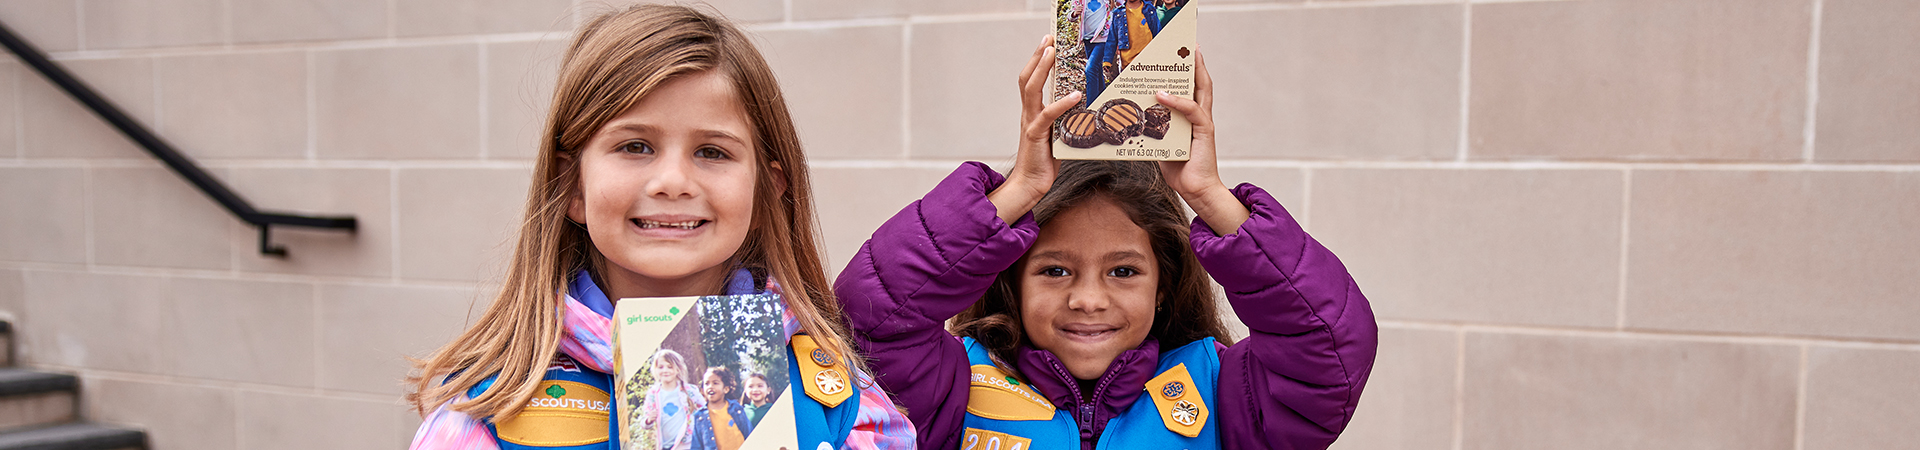  Girl Scout Daisies standing outside holding boxes of cookies and smiling 